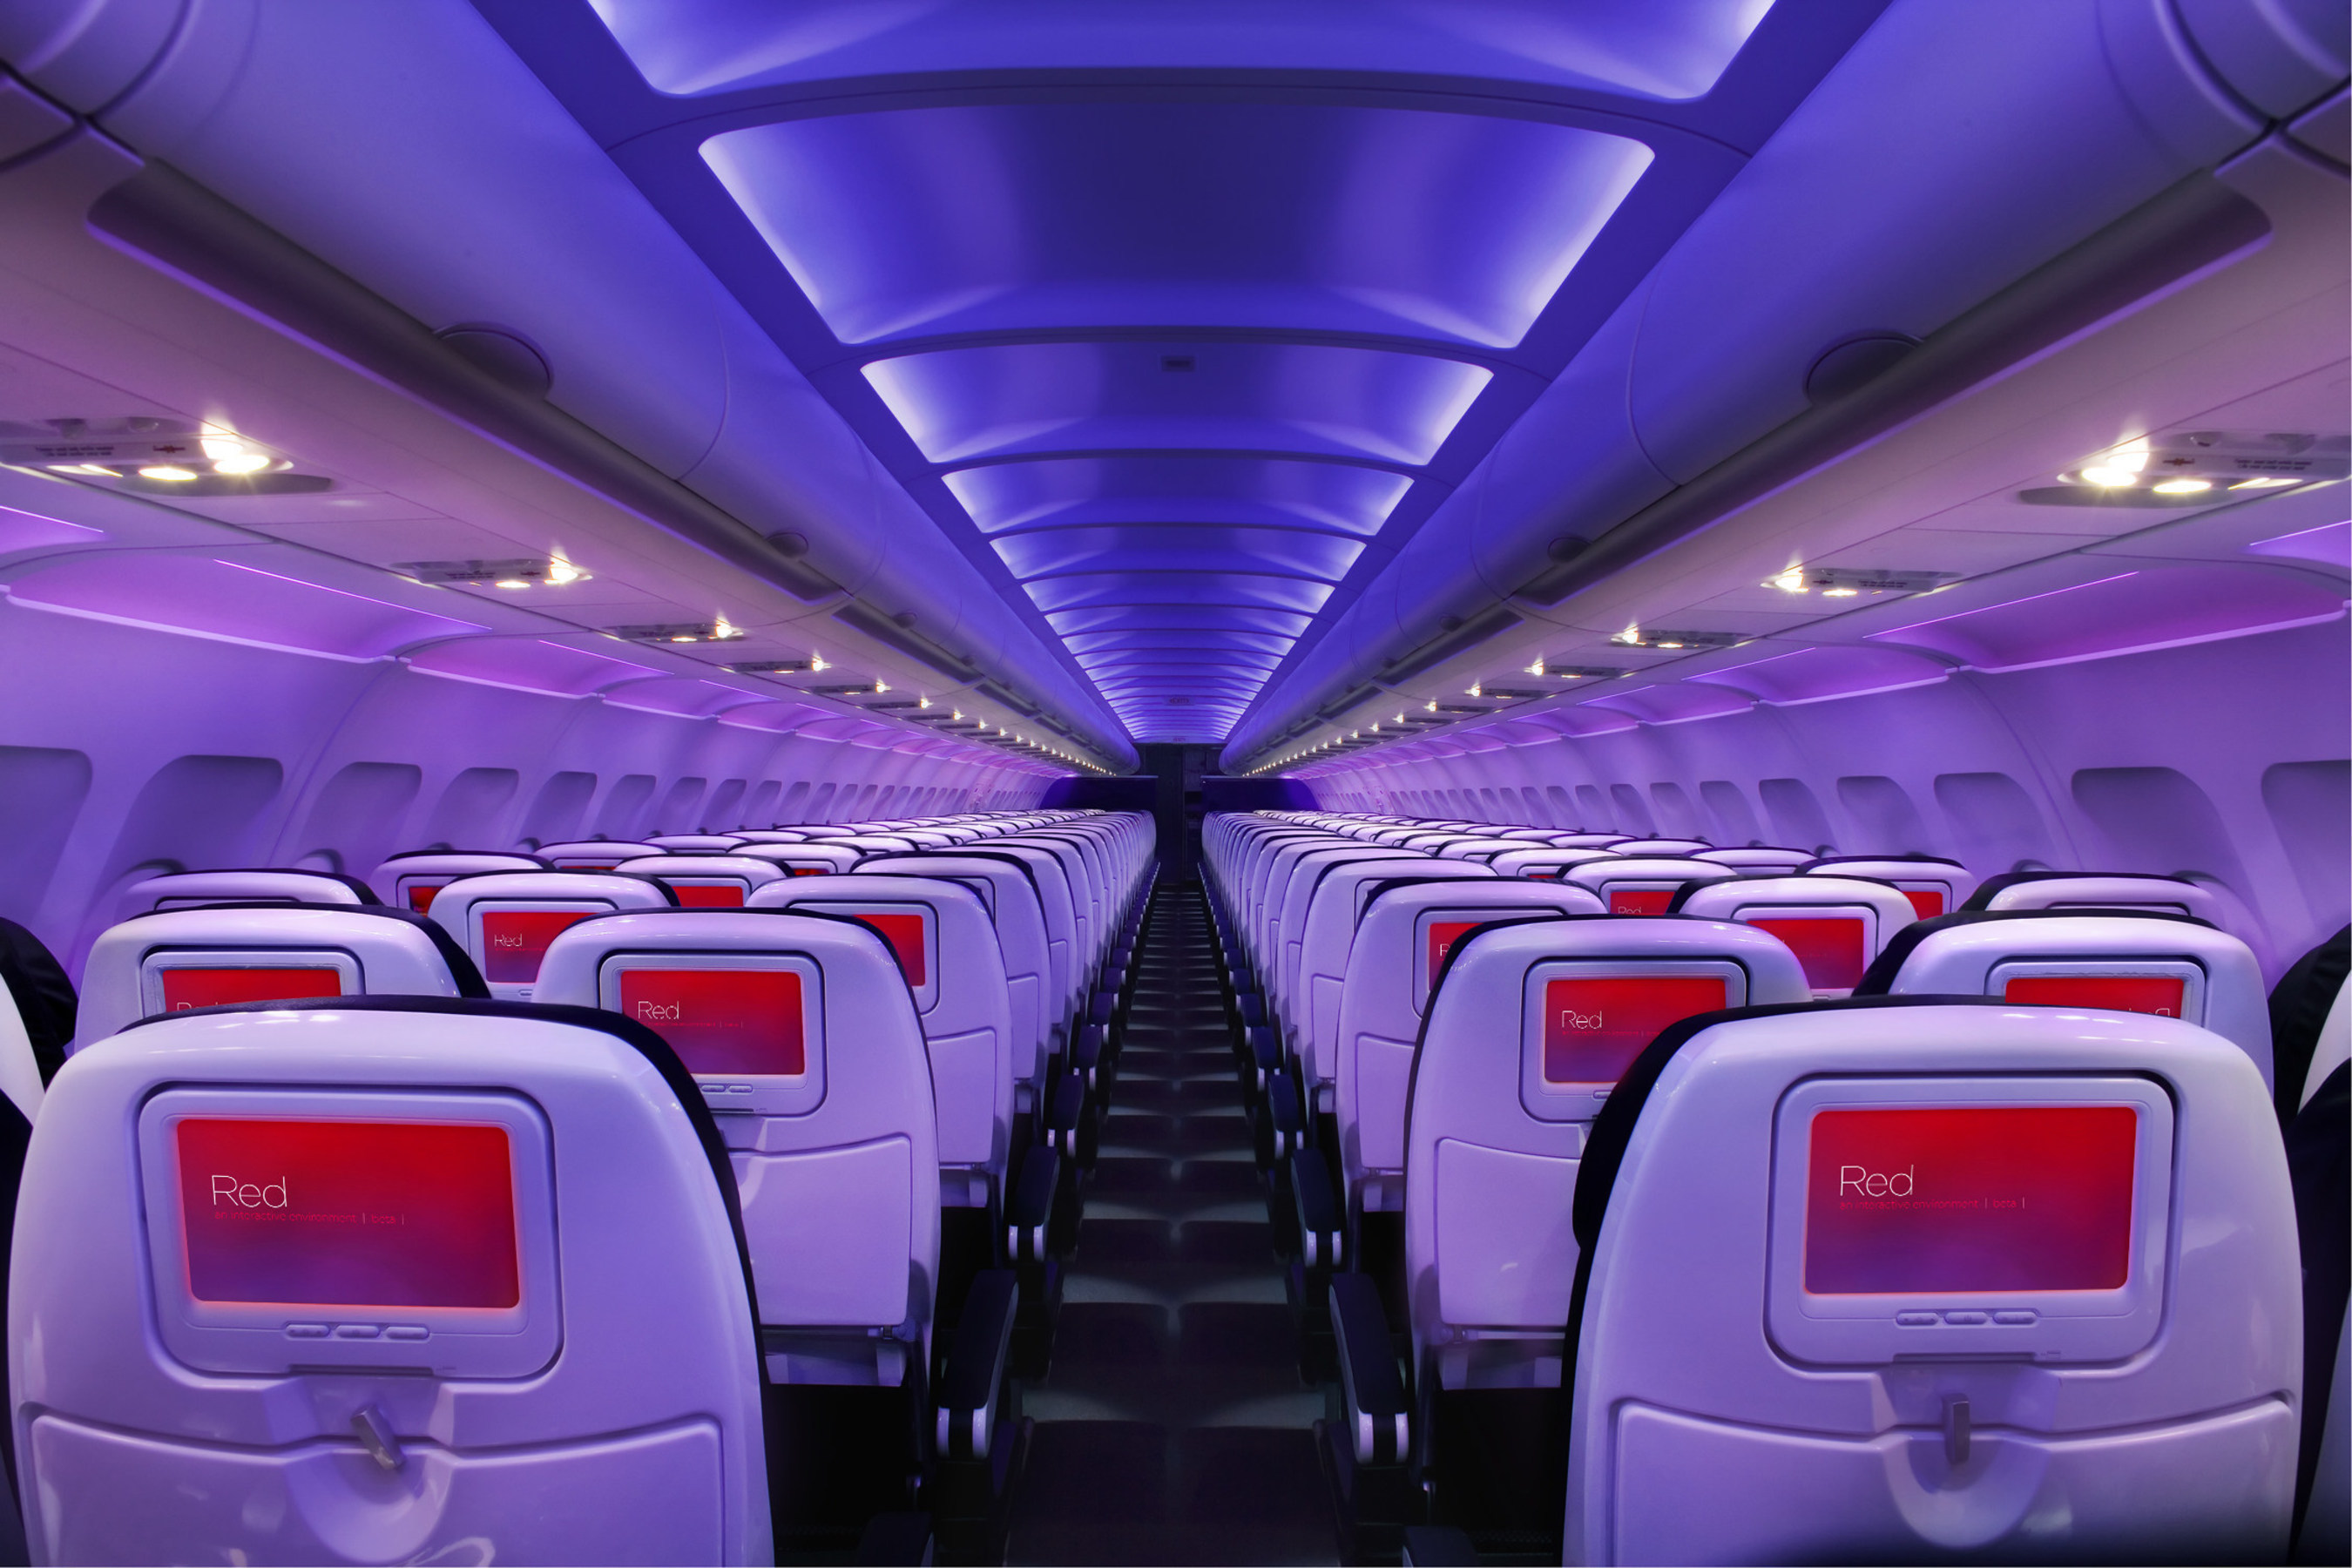 Virgin America Named Top Domestic Airline In The Travel + Leisure World's Best Awards Survey